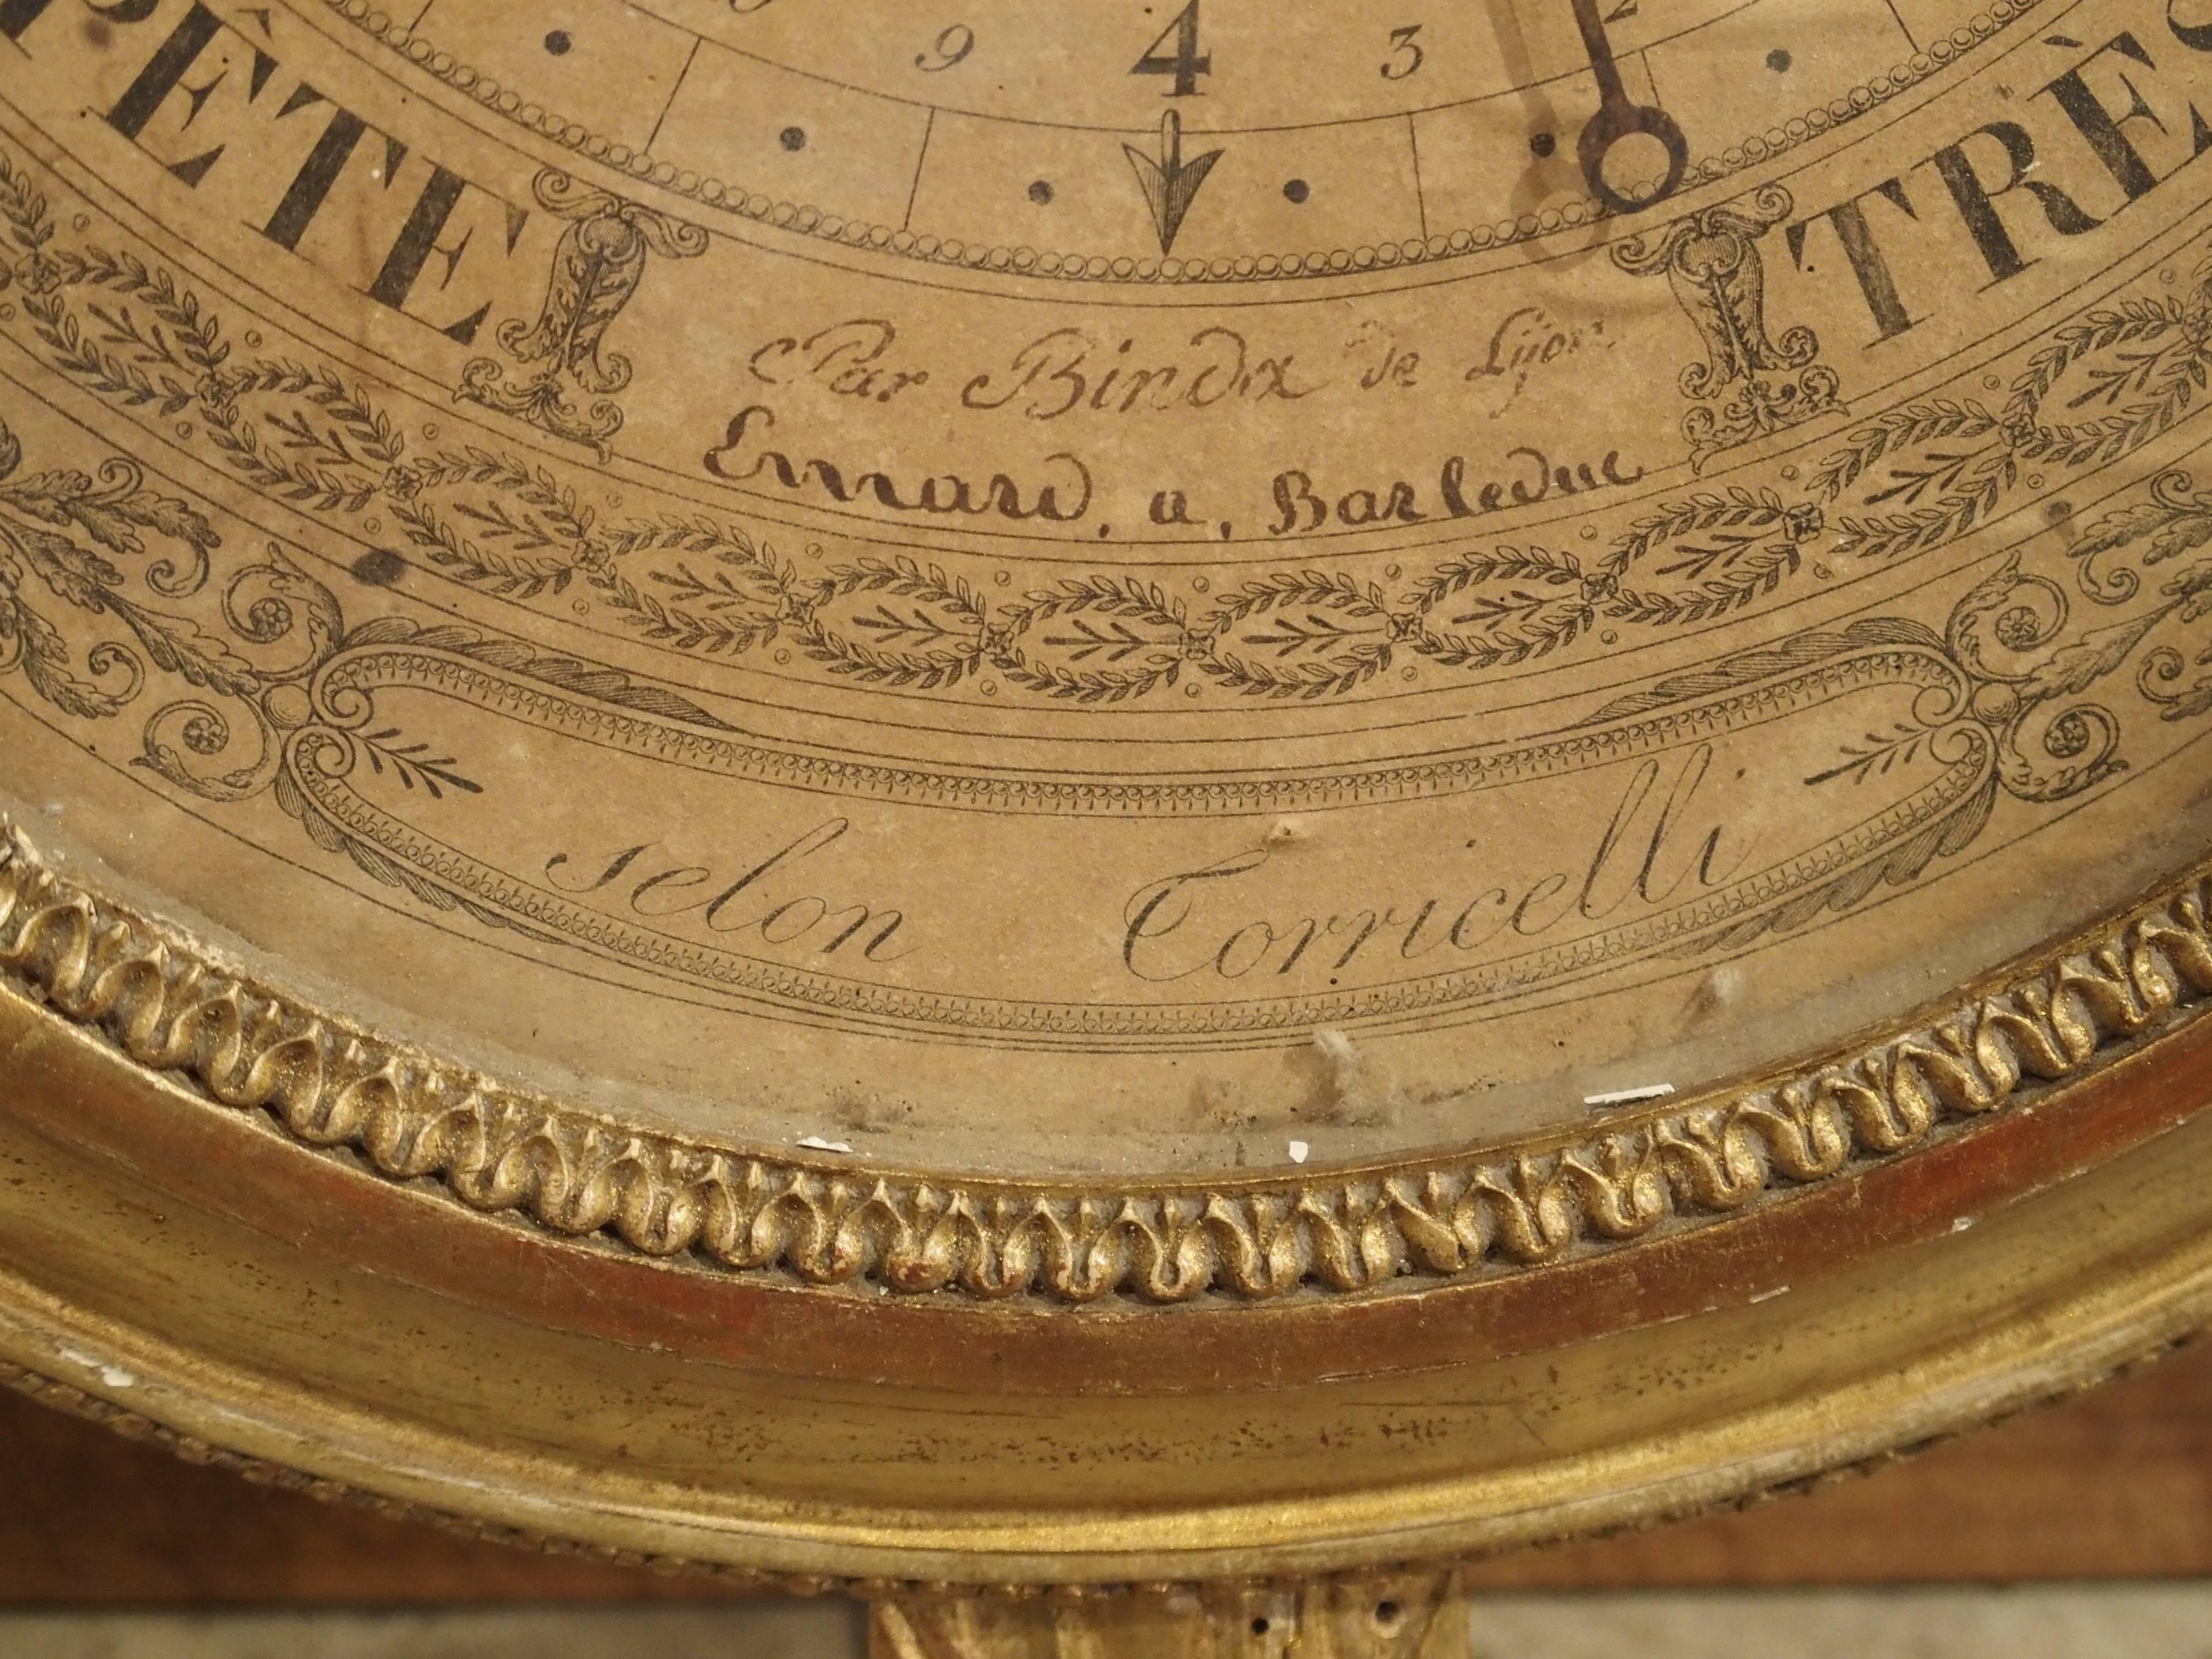 This rare barometer is known as a Selon de Torricelli and dates to the late 18th century. This name refers to the mechanism invented by Italian physicist Evangelista Torricelli over 100 years earlier. It is giltwood with motifs of the laurel leaf